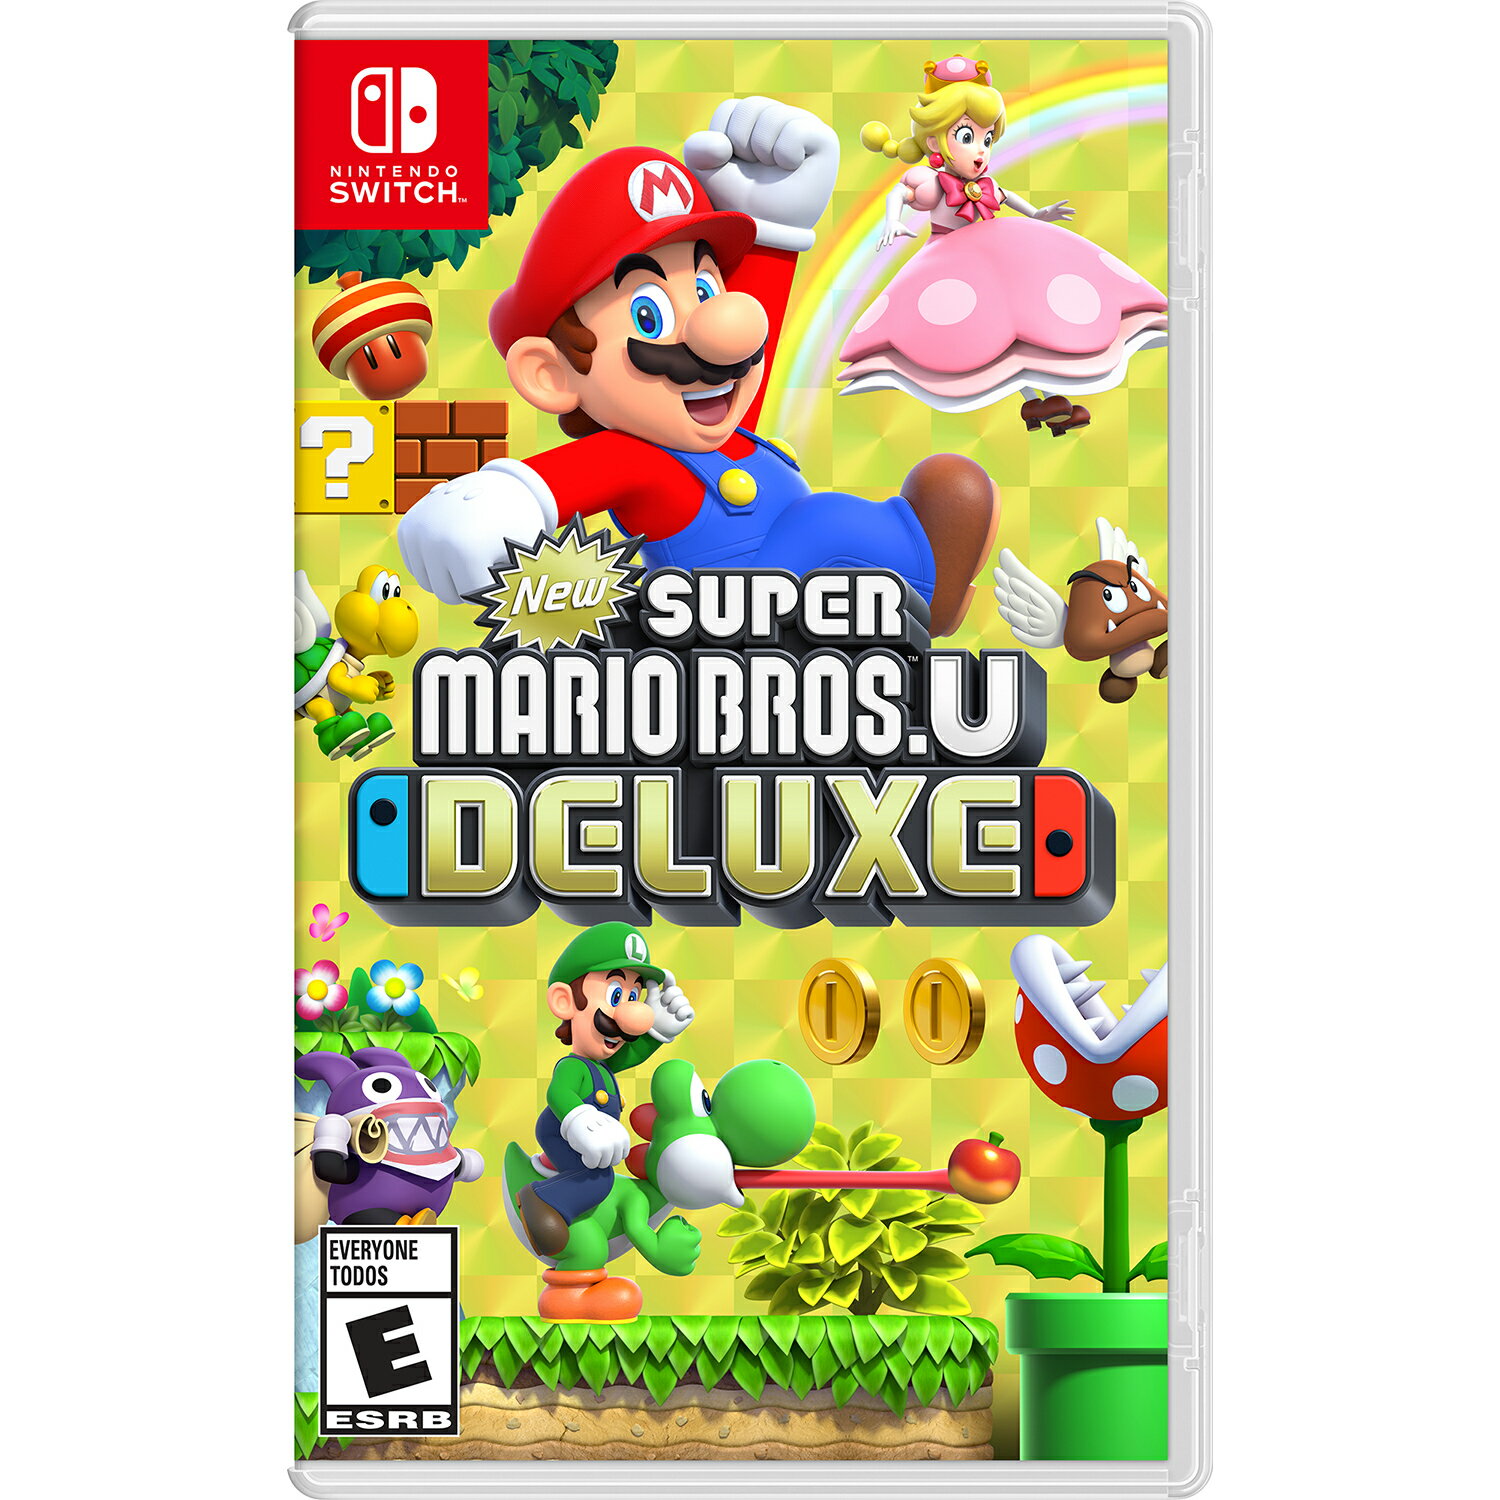 download super mario bros u deluxe switch for free